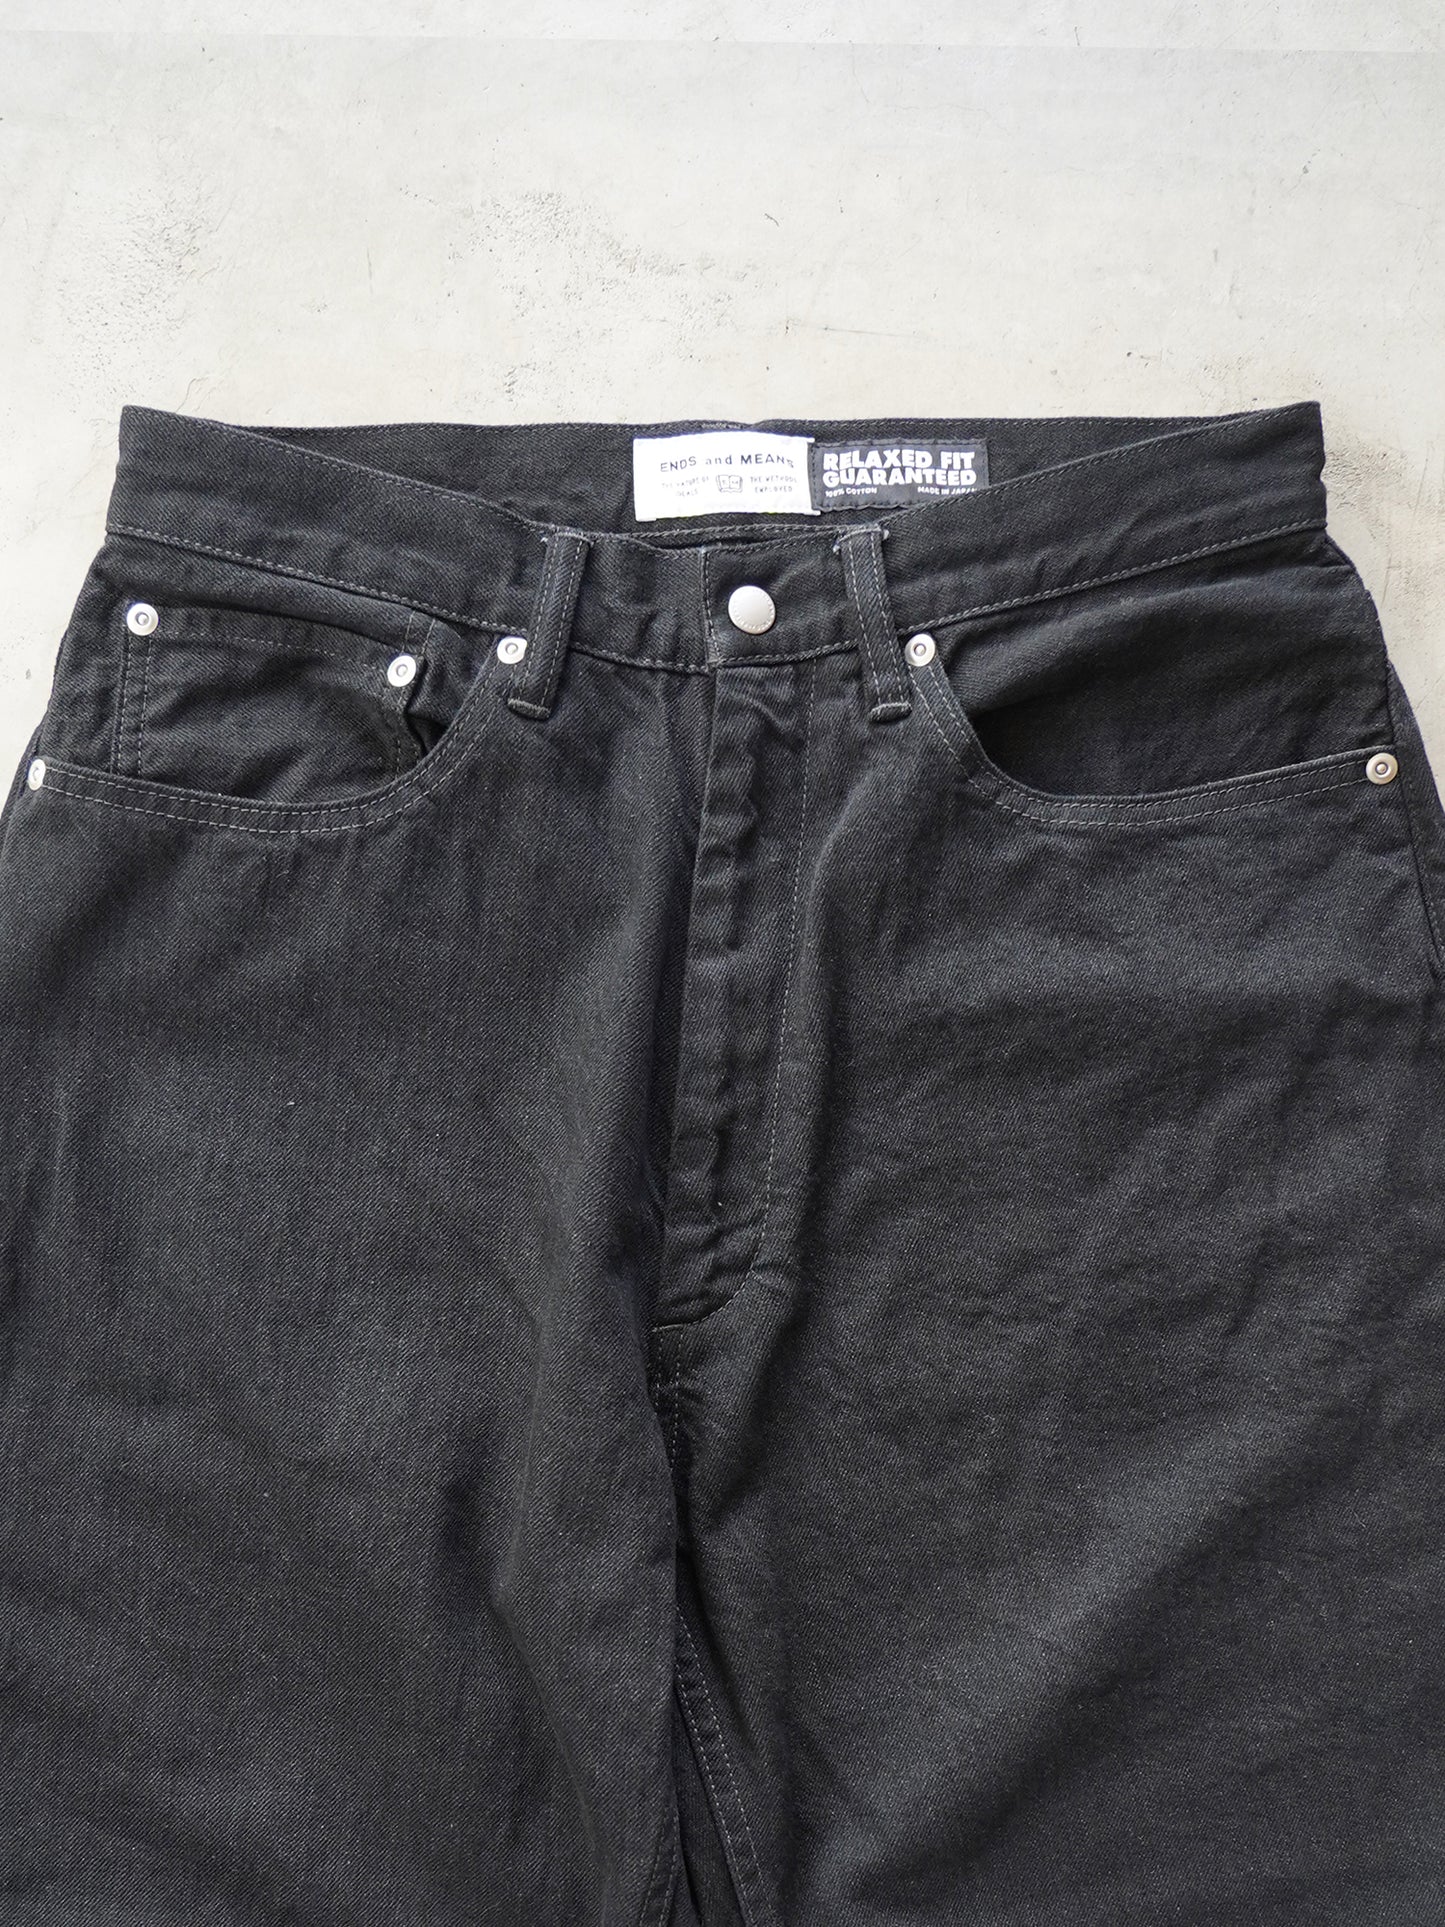 Relaxed fit 5 Pockets Denim Black (CH Limited)